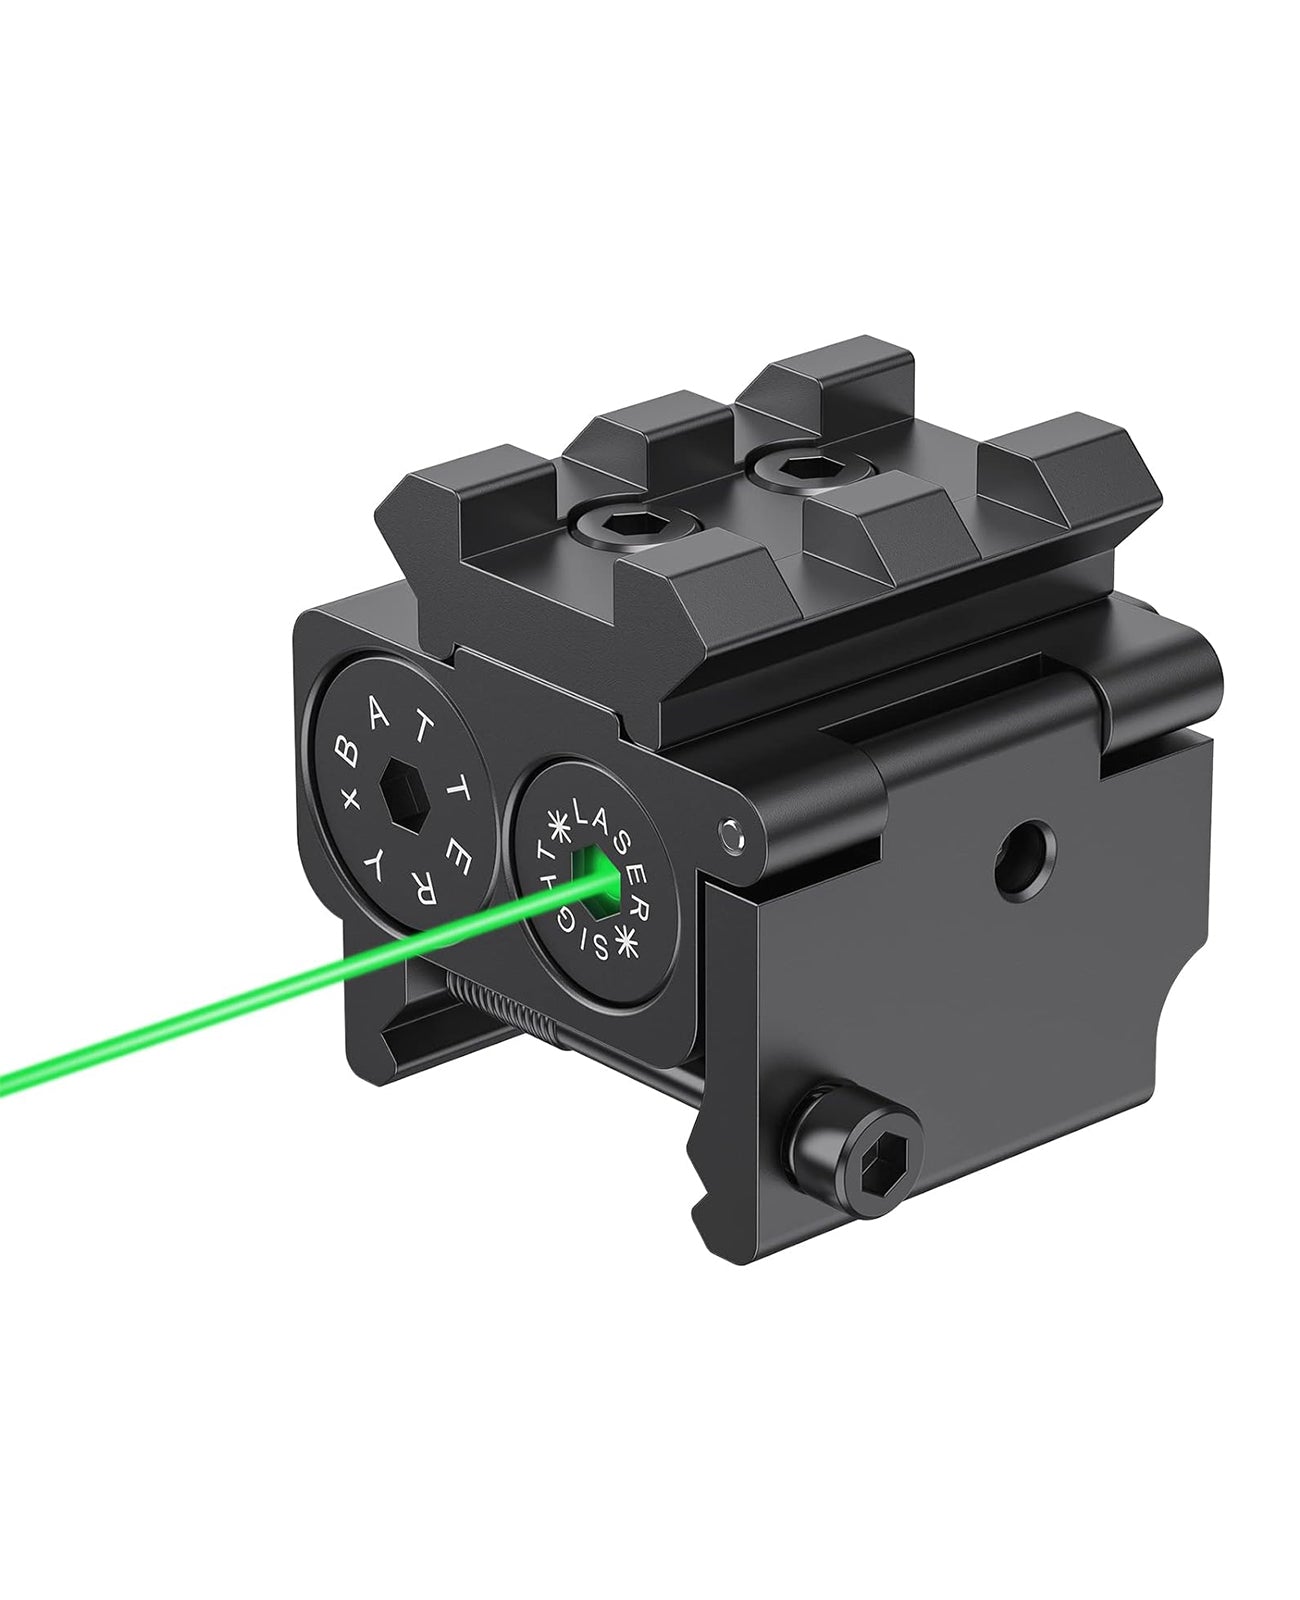 EZshoot Red/Green Laser Sight with Rail Mount for Pistols